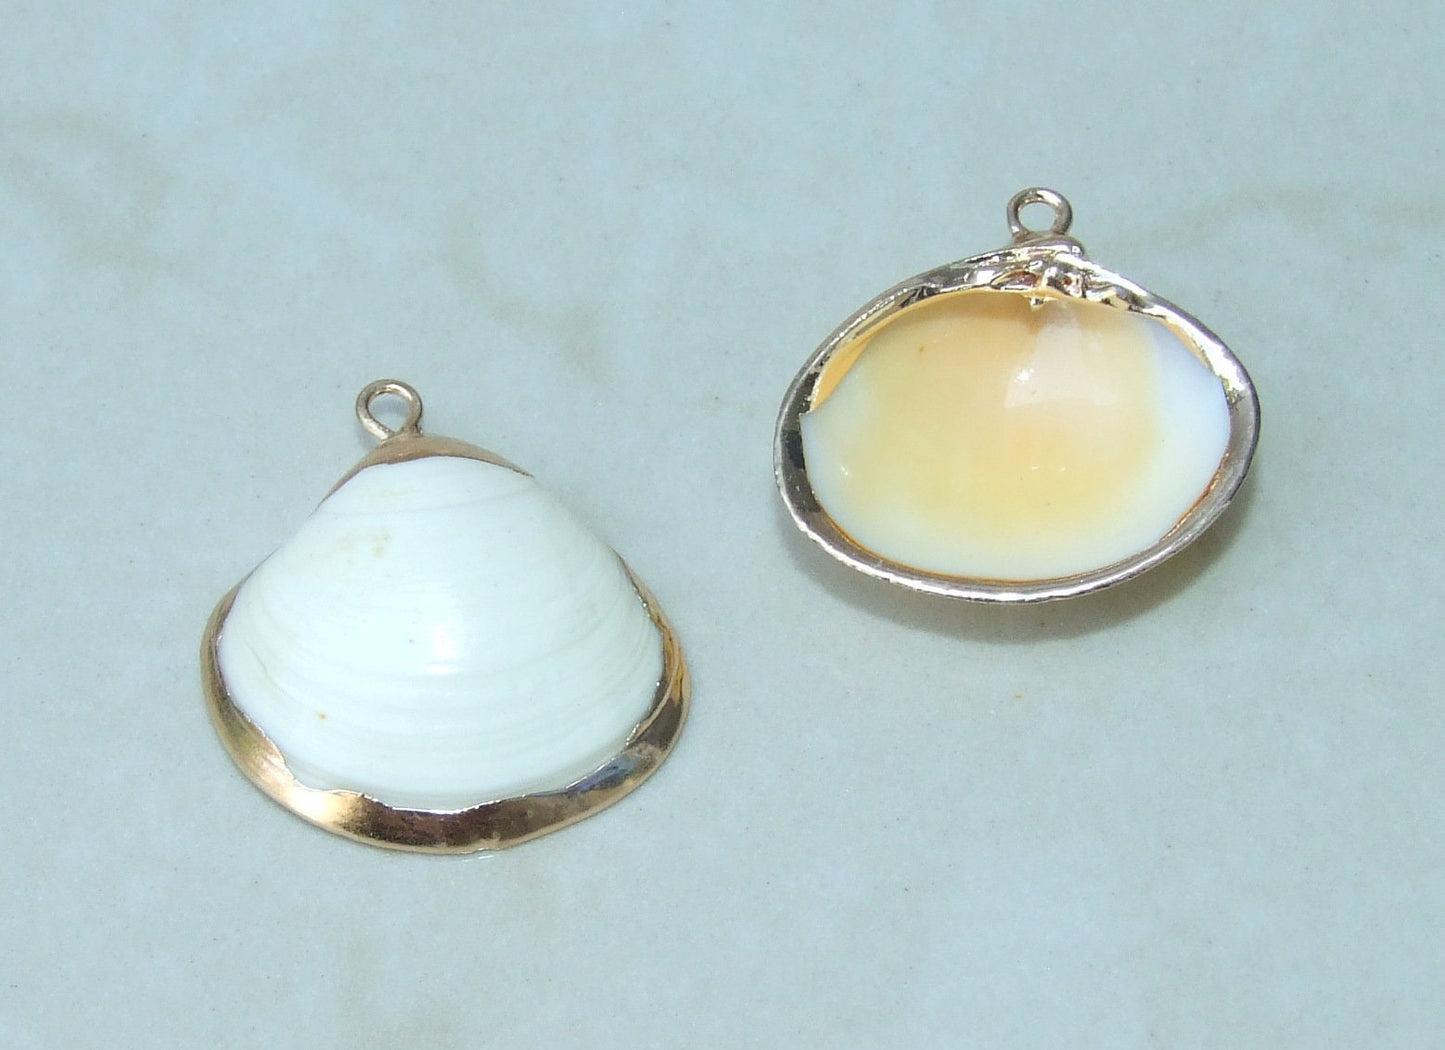 Pair of Small Clam Shell Pendant, Gold Edge Loop, Natural Seashell, Seashell Necklace, Beach Jewelry, Ocean Seashell, 25mm x 25mm, 09-01